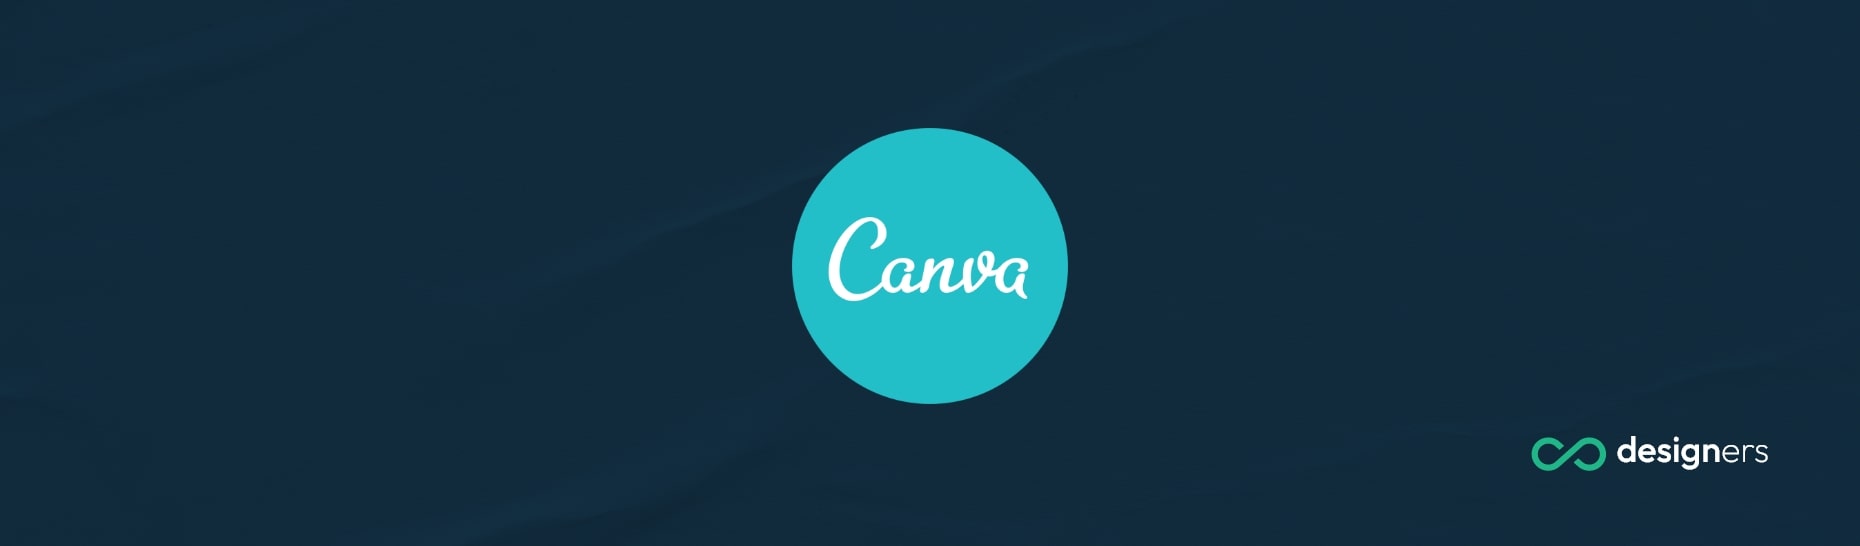 Is Canva Overvalued?